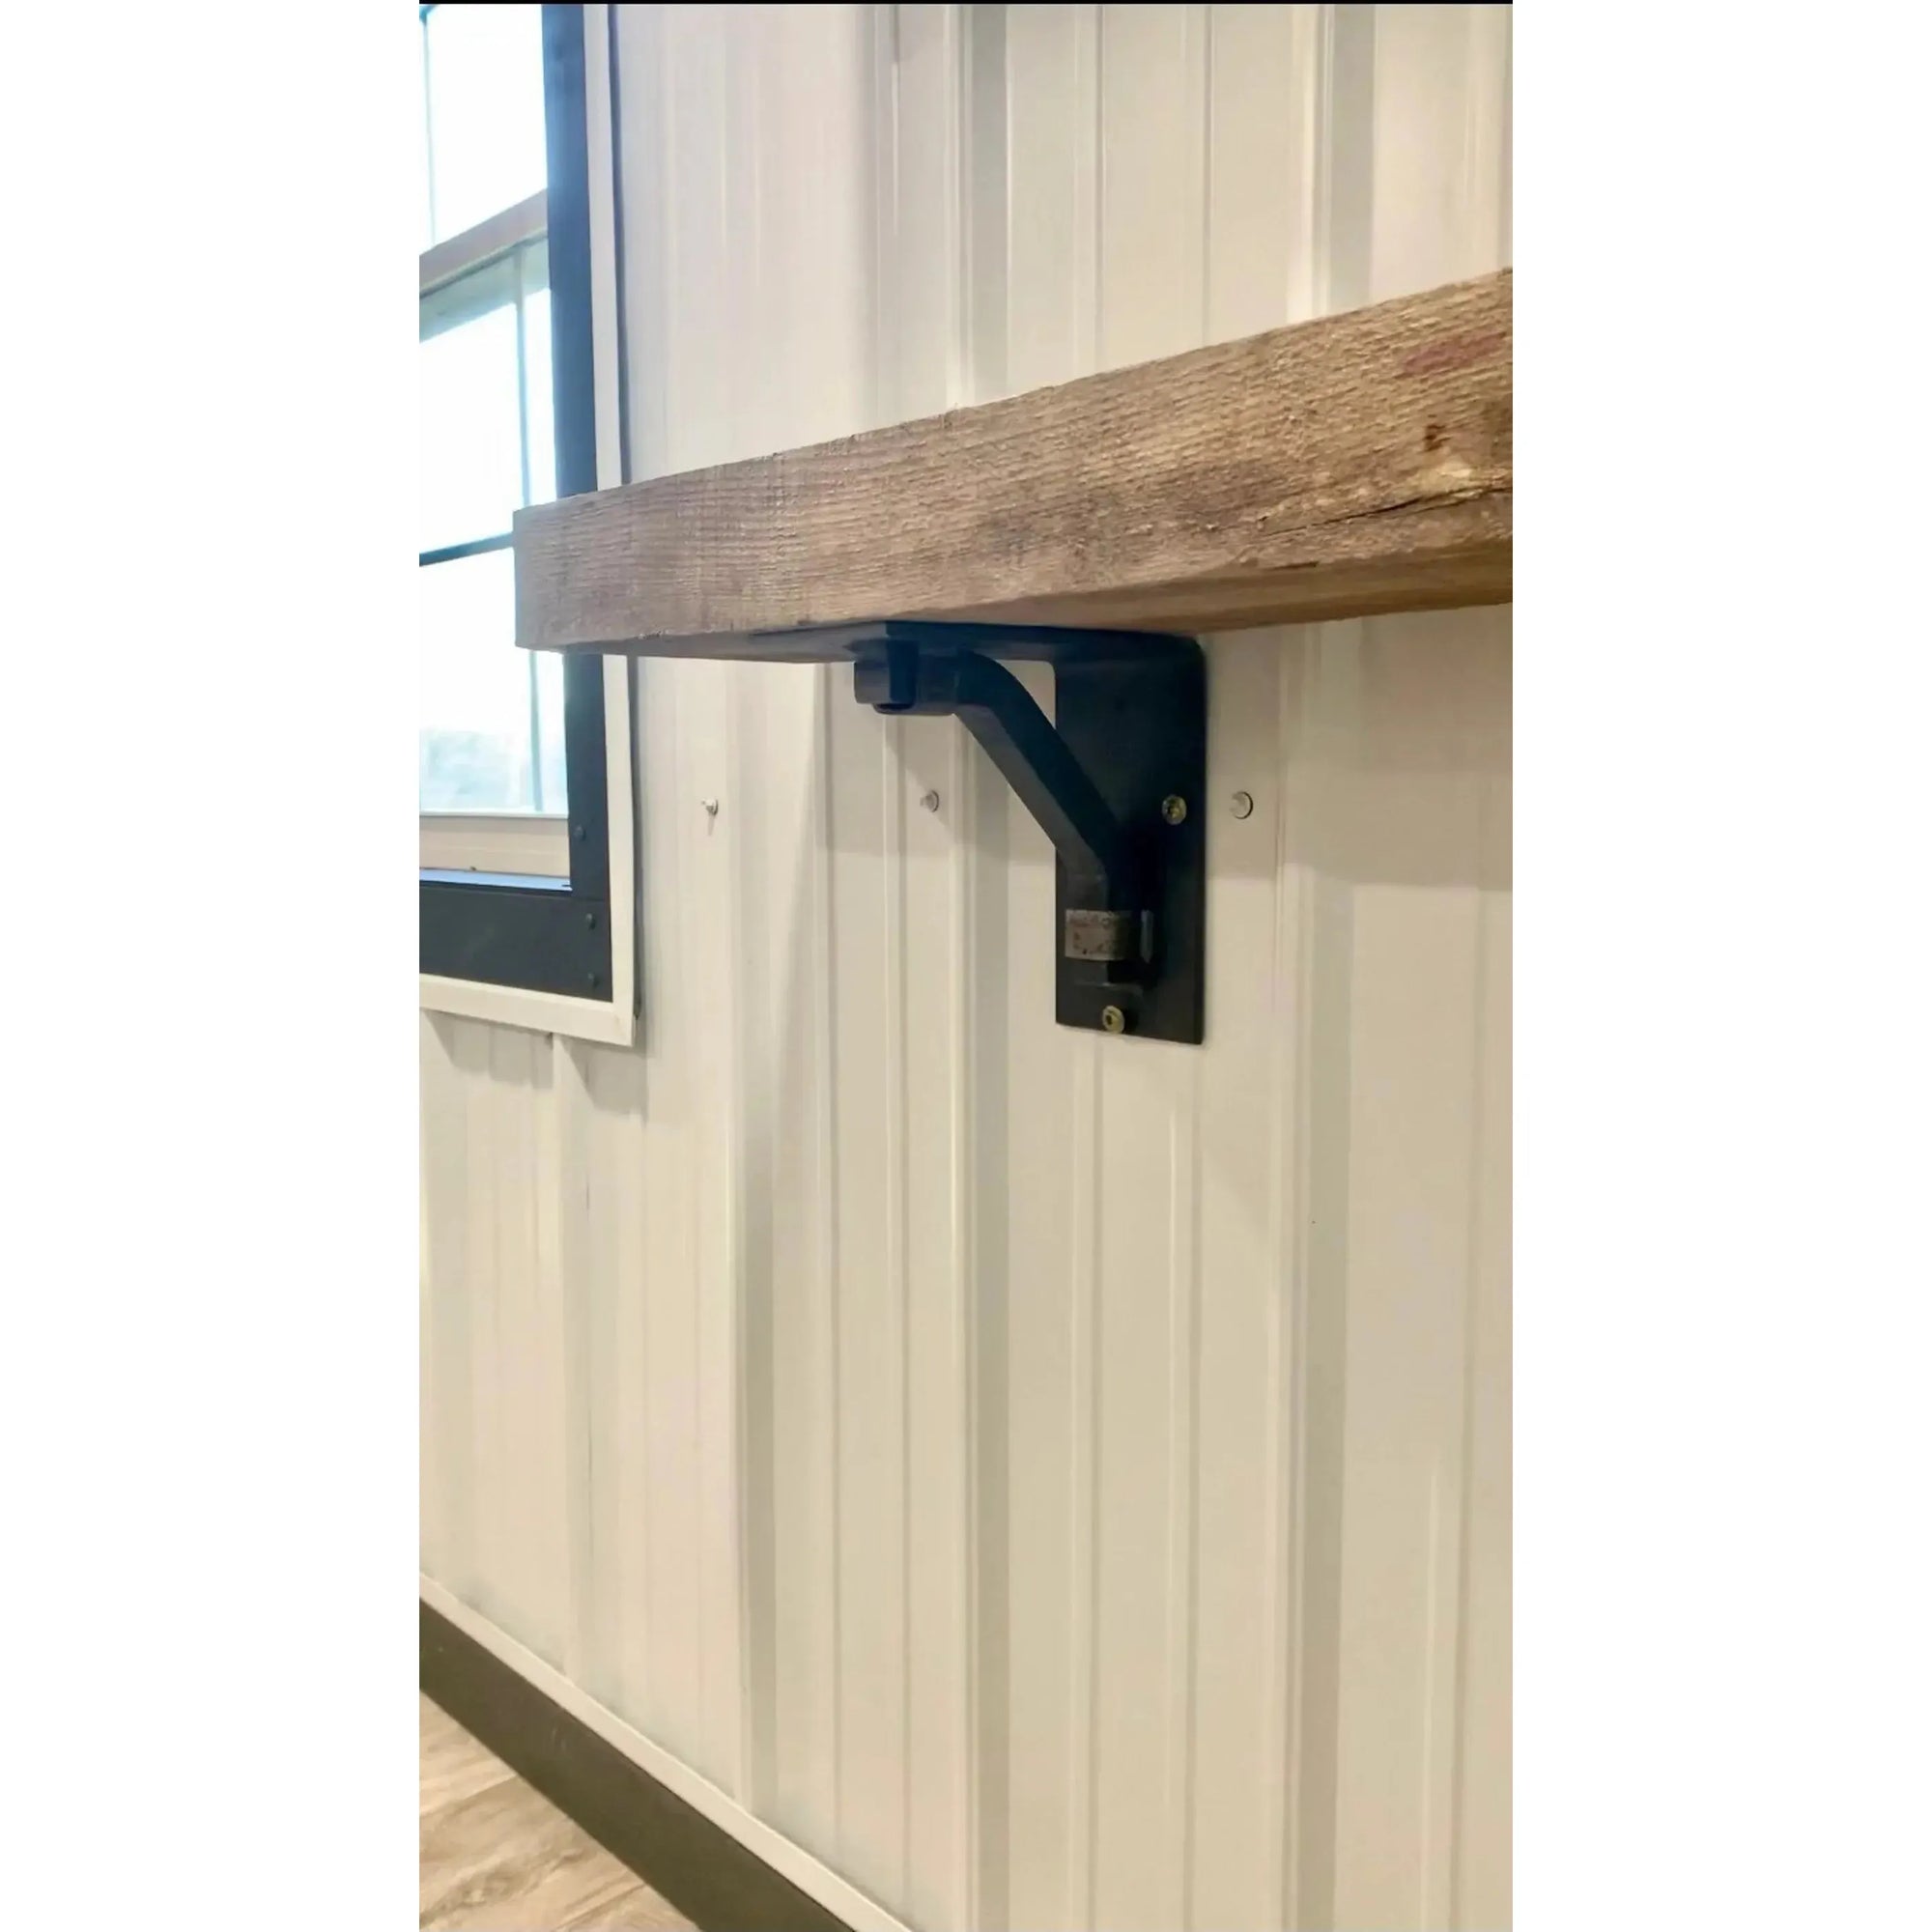 The Rosamond Shelf Supports Shelf Support 5" Depth x 5" Wall Mount Length Finish Raw - Uncoated Metal | Industrial Farm Co